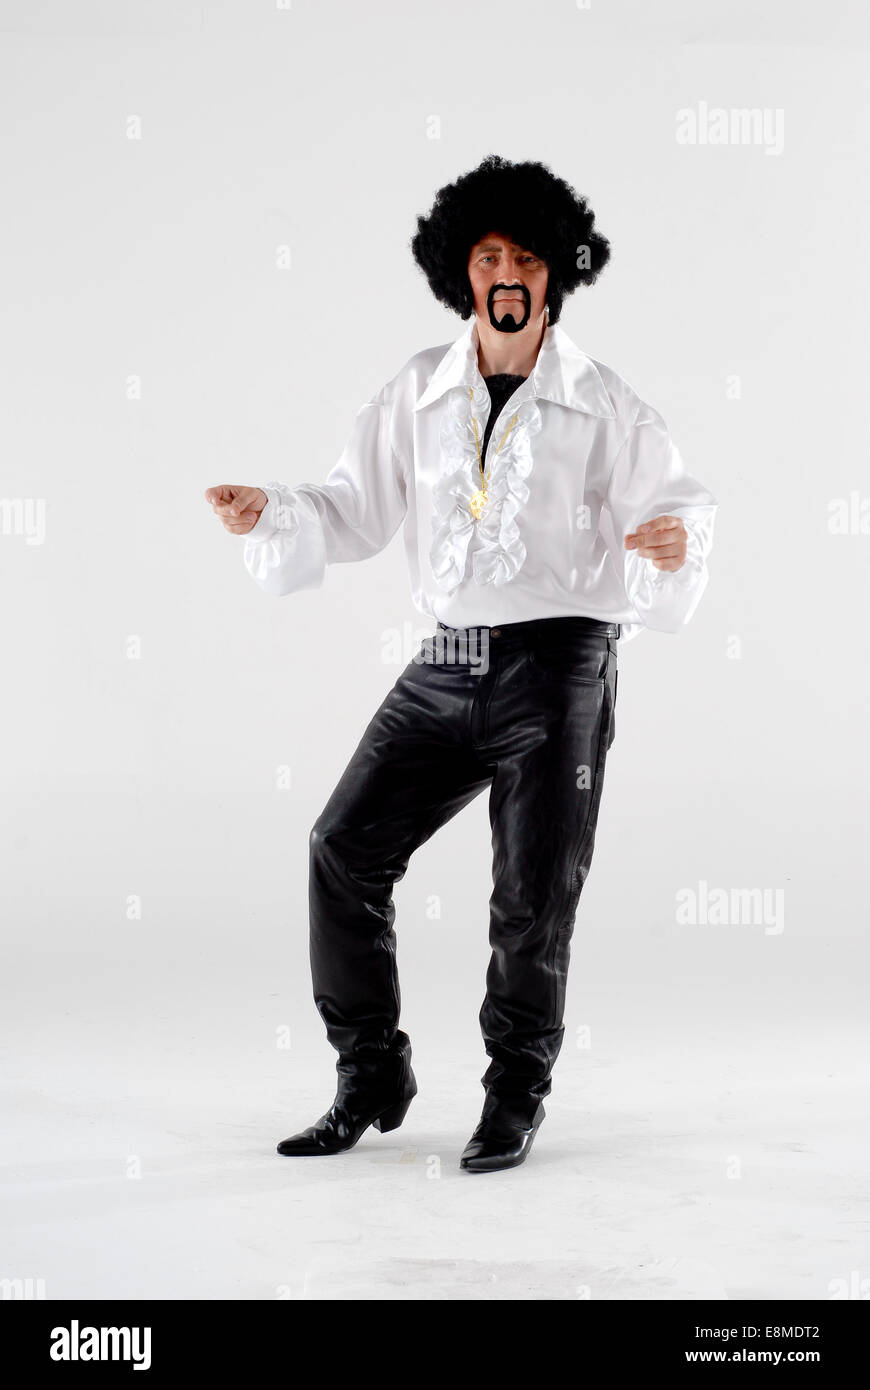 man in fancy dress comedy costume in full tom jones, the singer outfit with  black wig, goatee, leather trousers & frilly shirt Stock Photo - Alamy